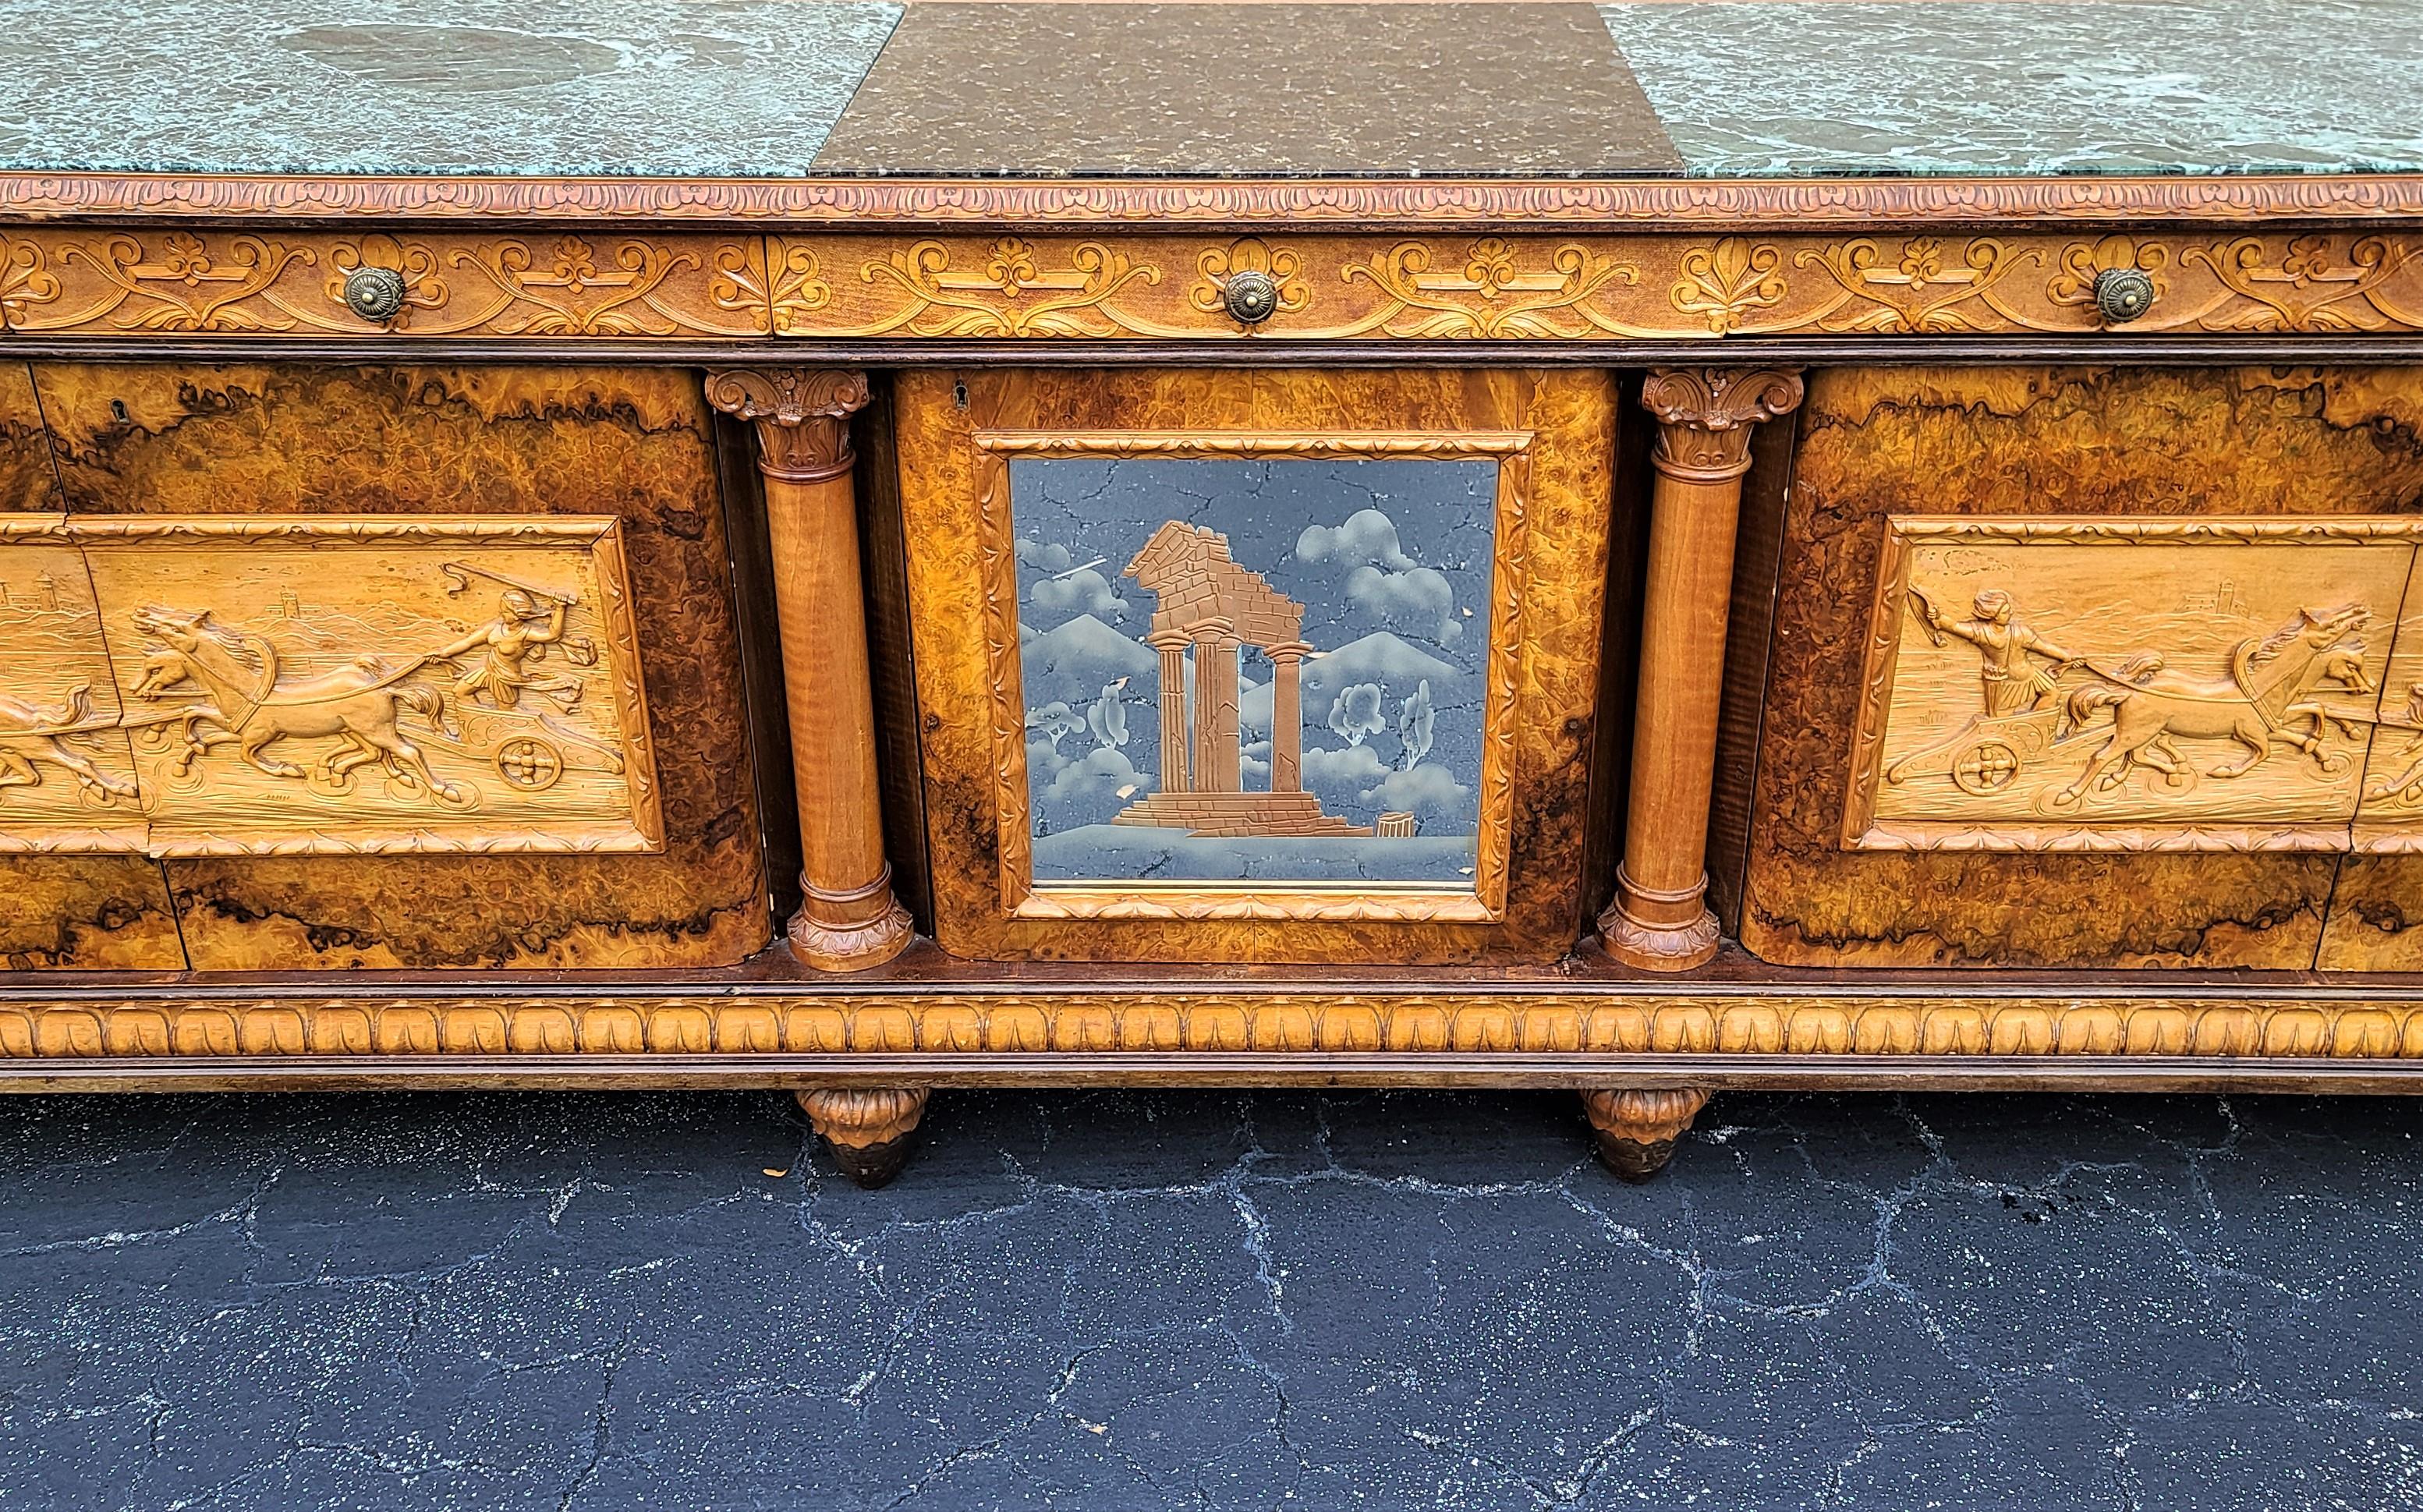 For FULL item description click on READ MORE below. 


Offering one of our recent Palm Beach estate fine furniture acquisitions of an
Antique c 1900 hand carved Neoclassical Italian credenza bar cabinet

Featuring all hand-carved drawer and door